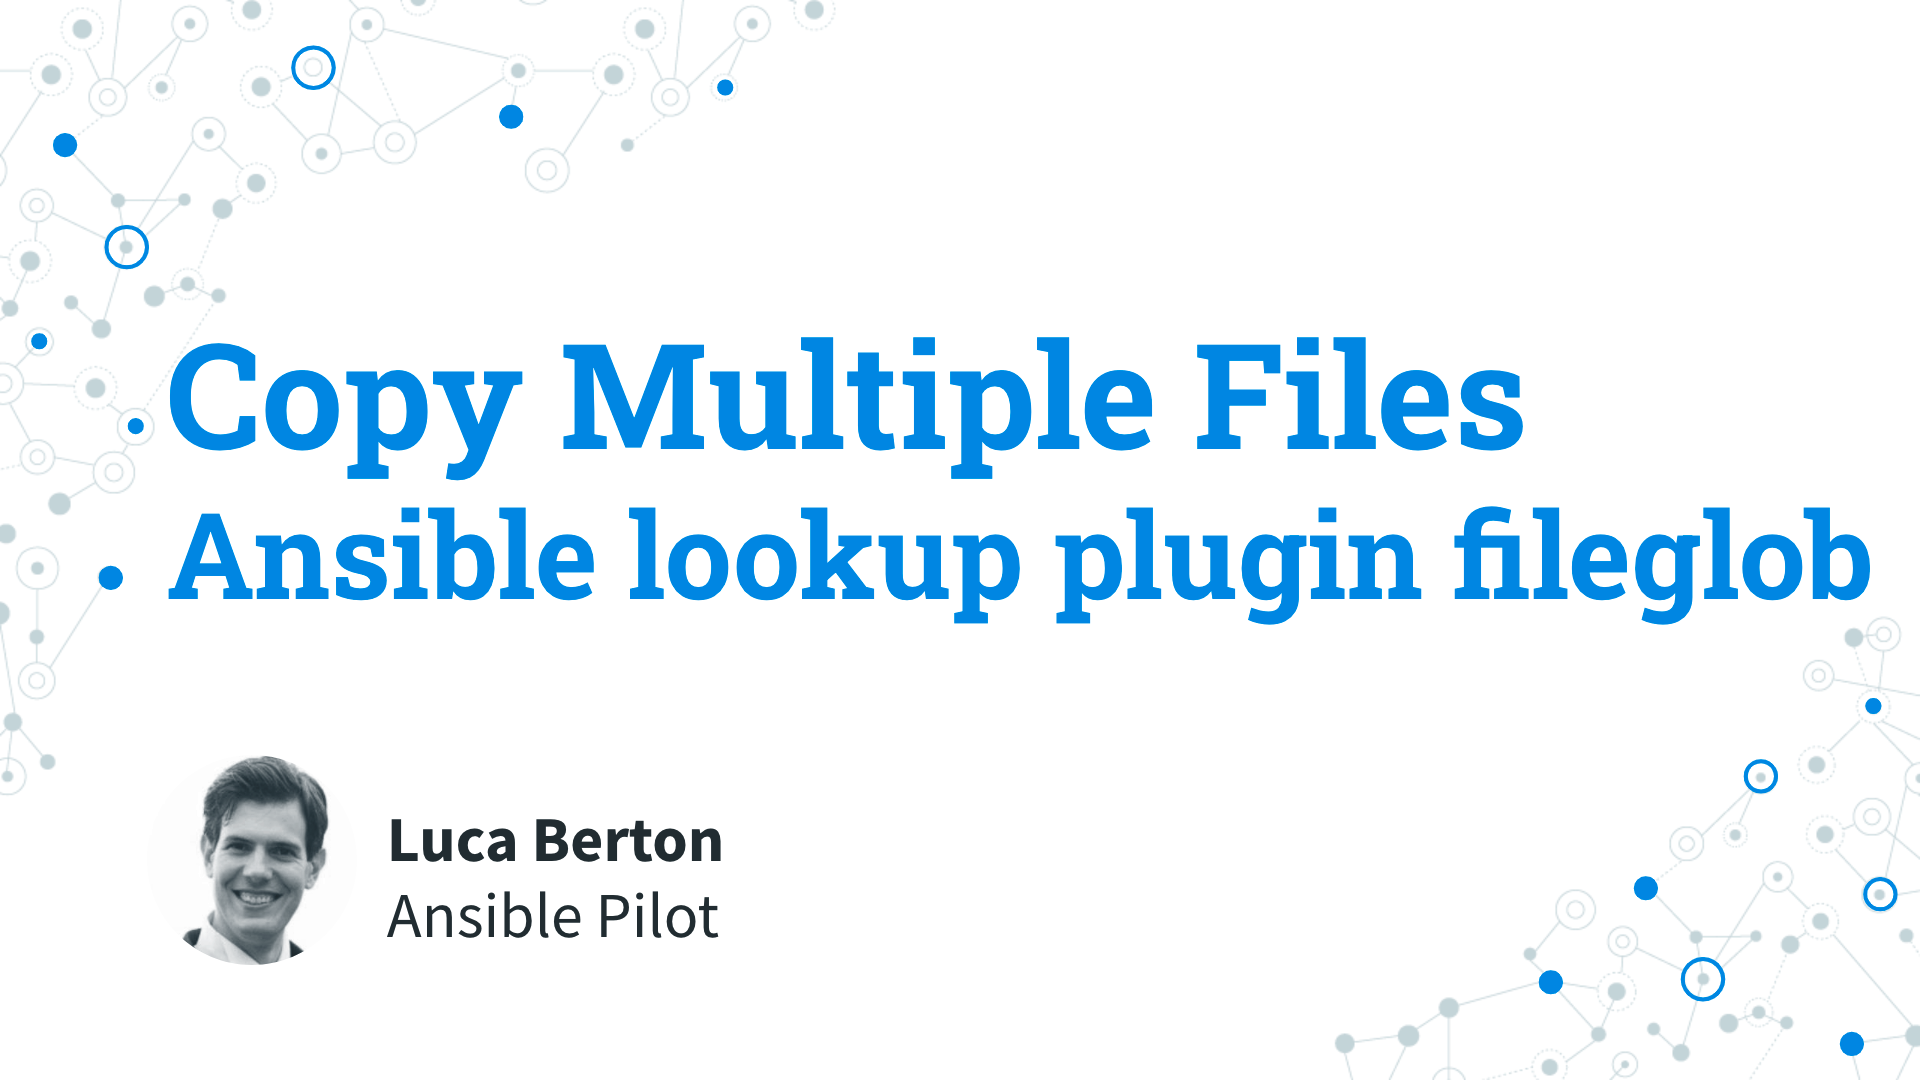 Copy Multiple Files to Remote Hosts - Local to Remote - Ansible lookup plugin fileglob